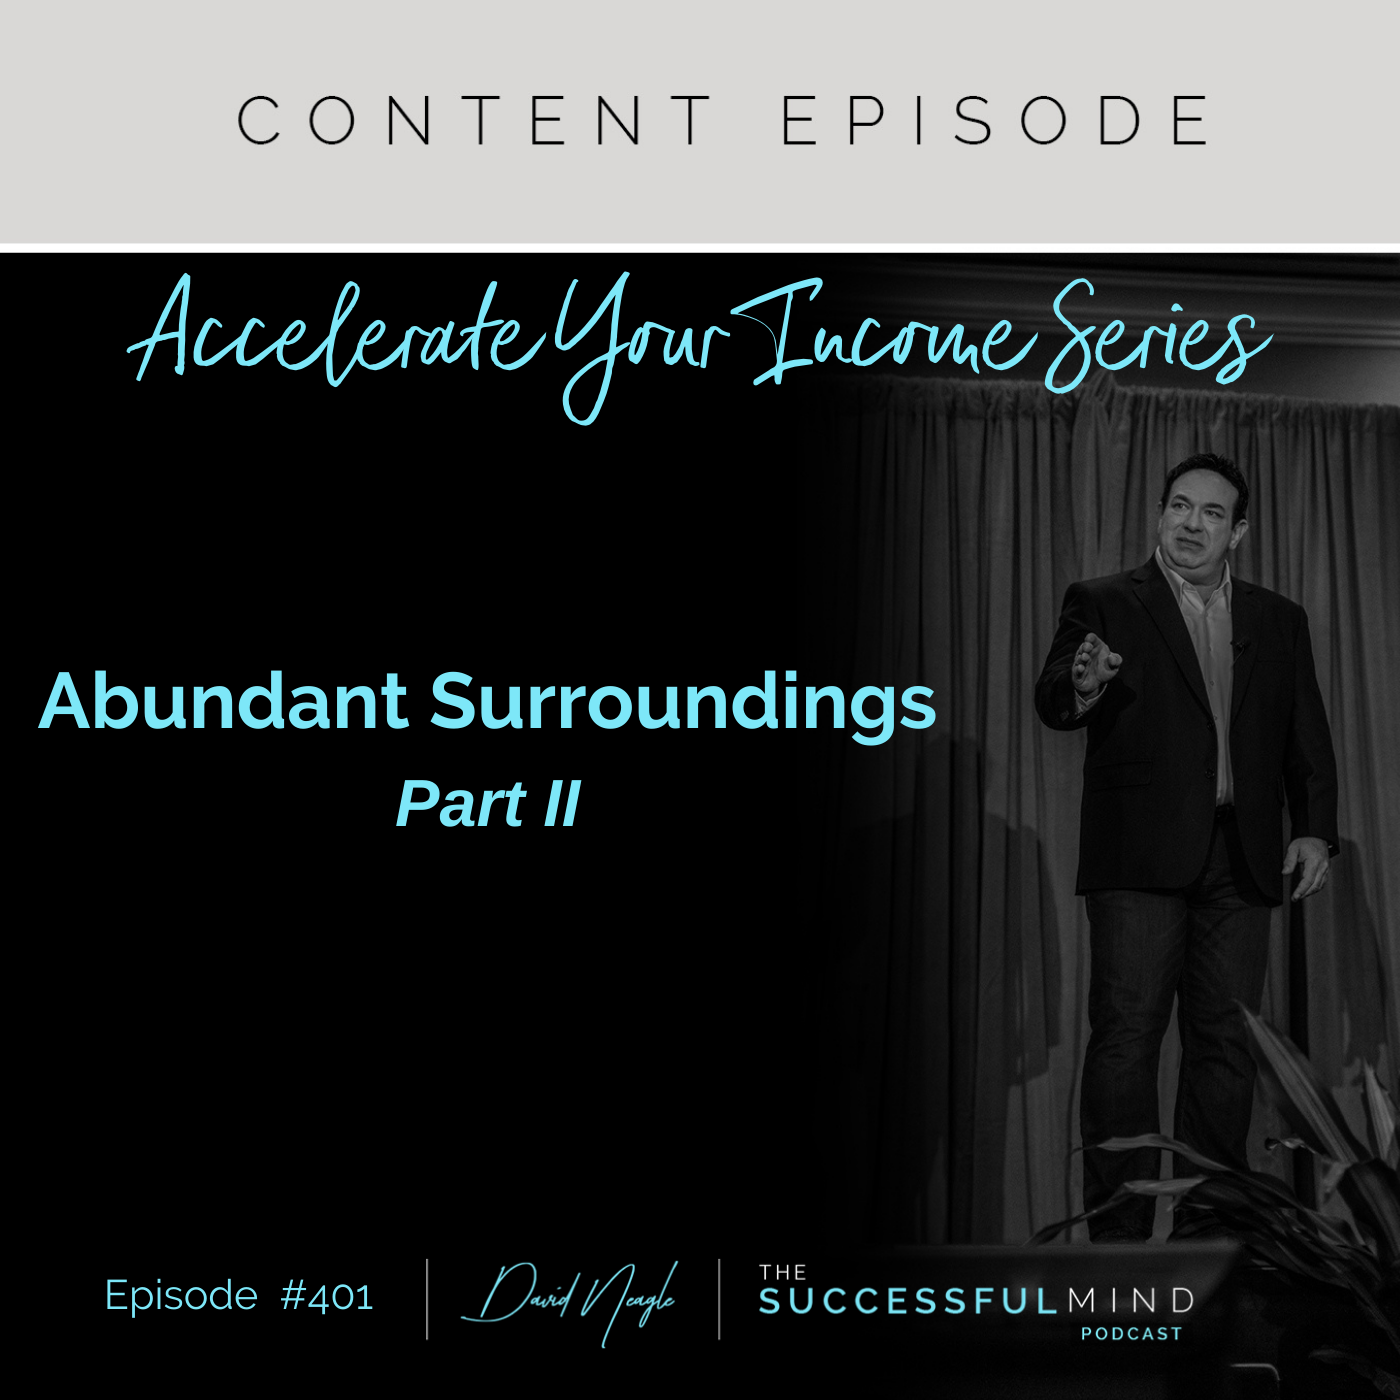 The Successful Mind Podcast - Episode 401 - Accelerate Your Income Series: Abundant Surroundings - Part II